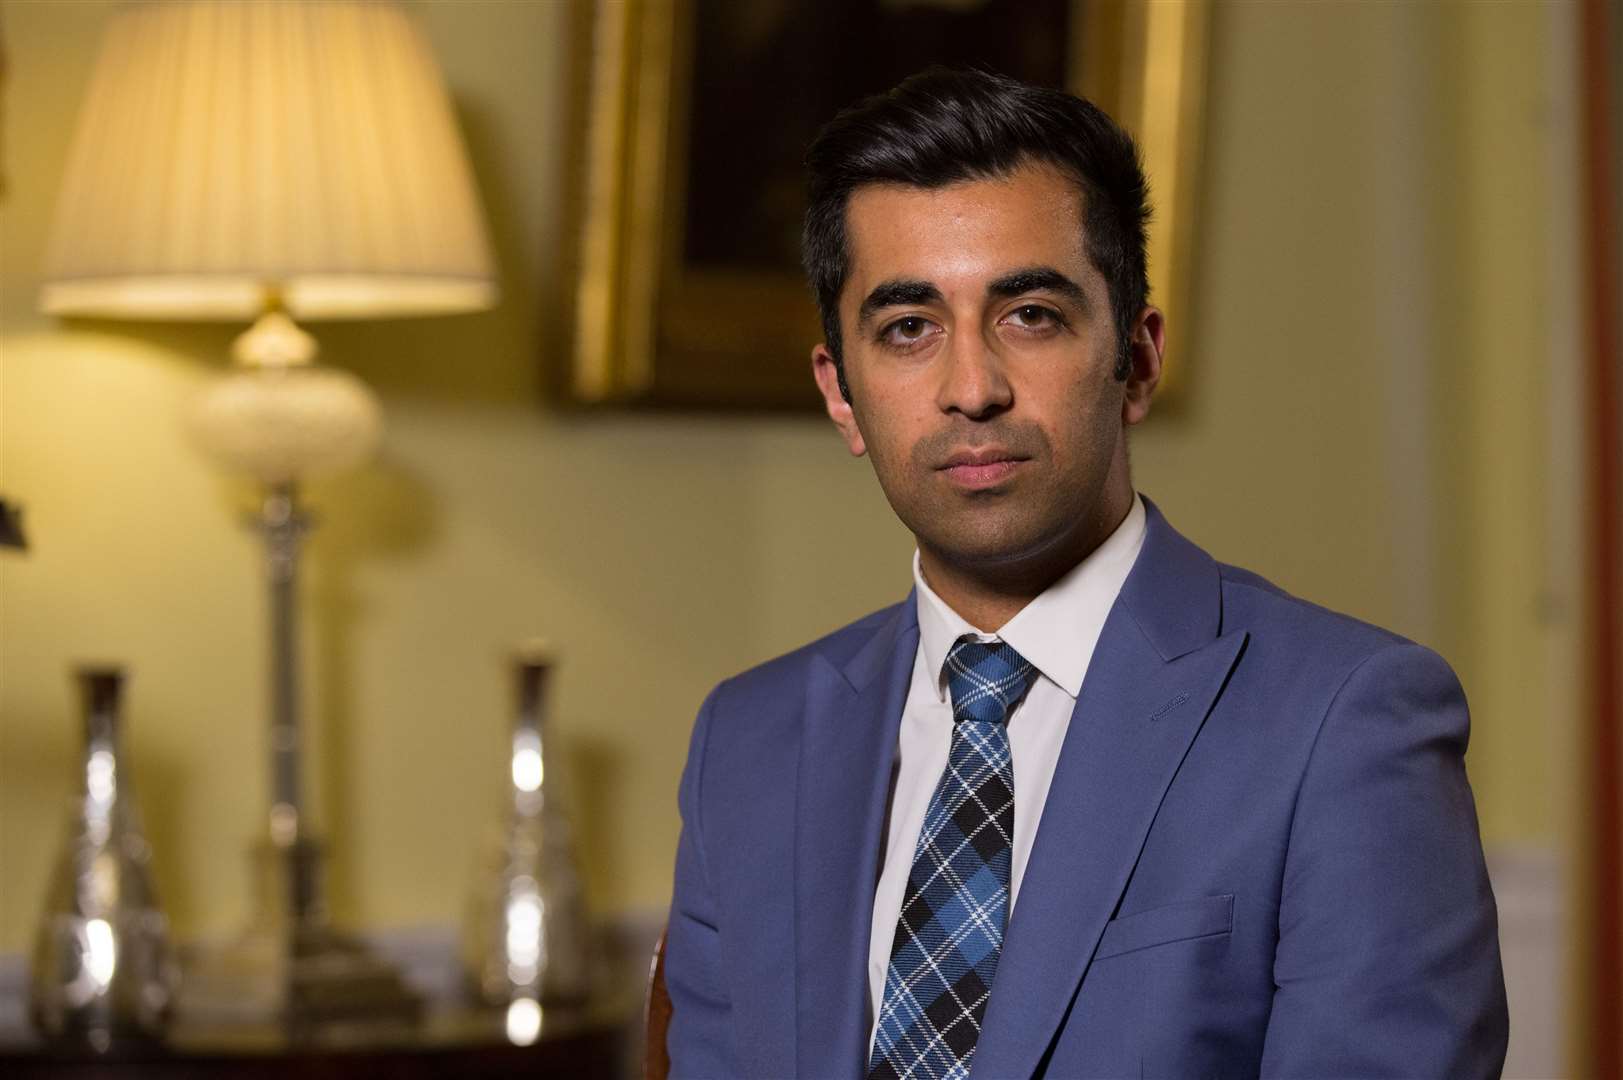 Humza Yousaf: 'We must remember that the virus has not gone away.'